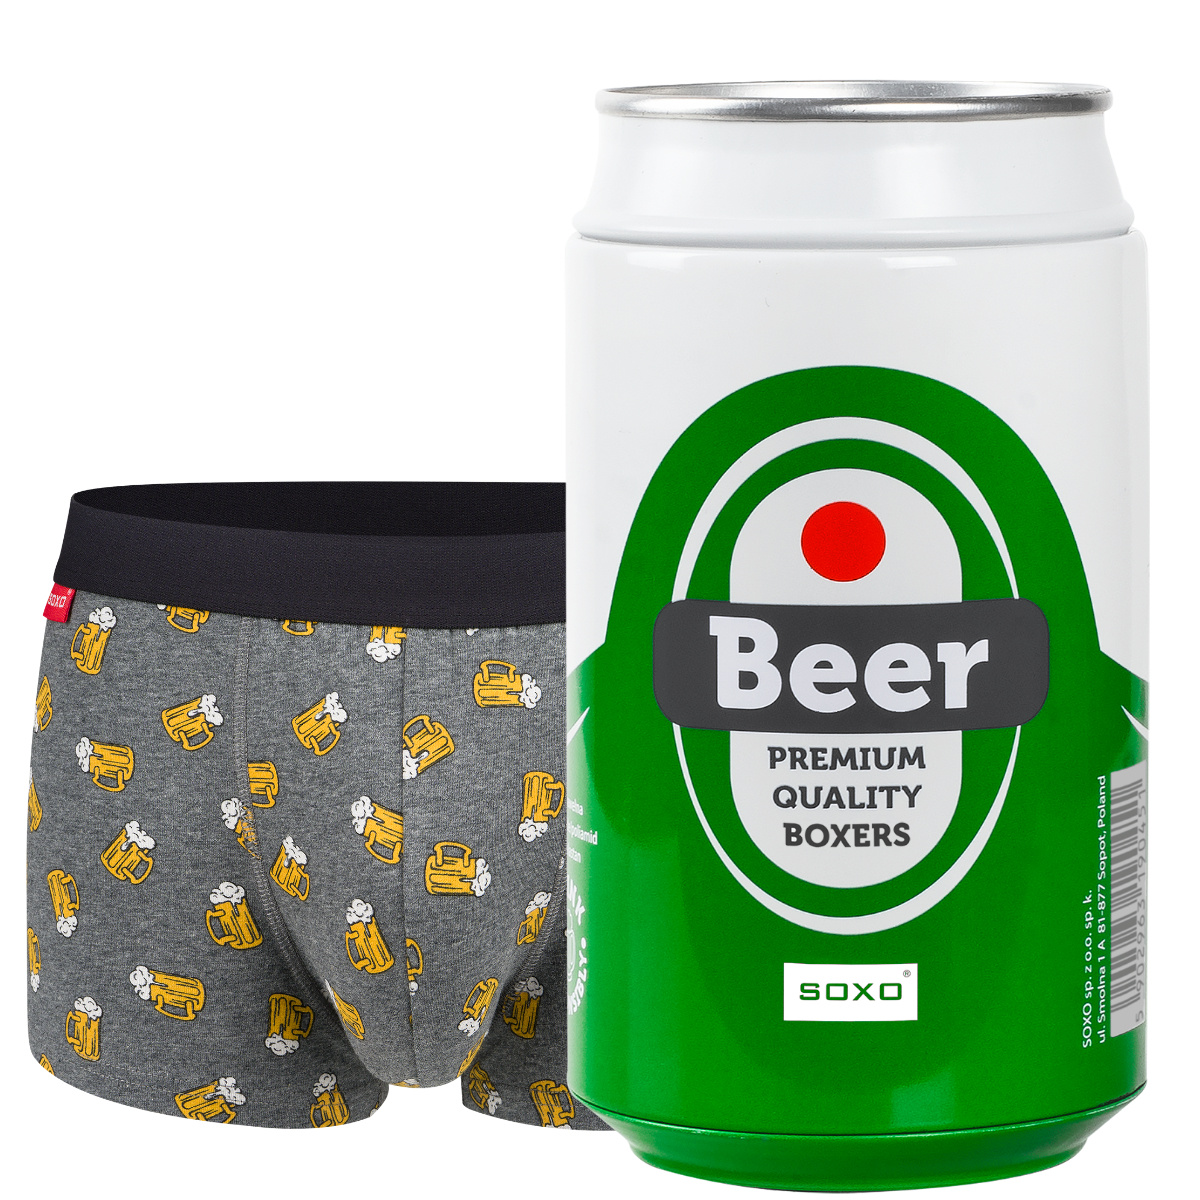 Men's boxer shorts Beer in a can